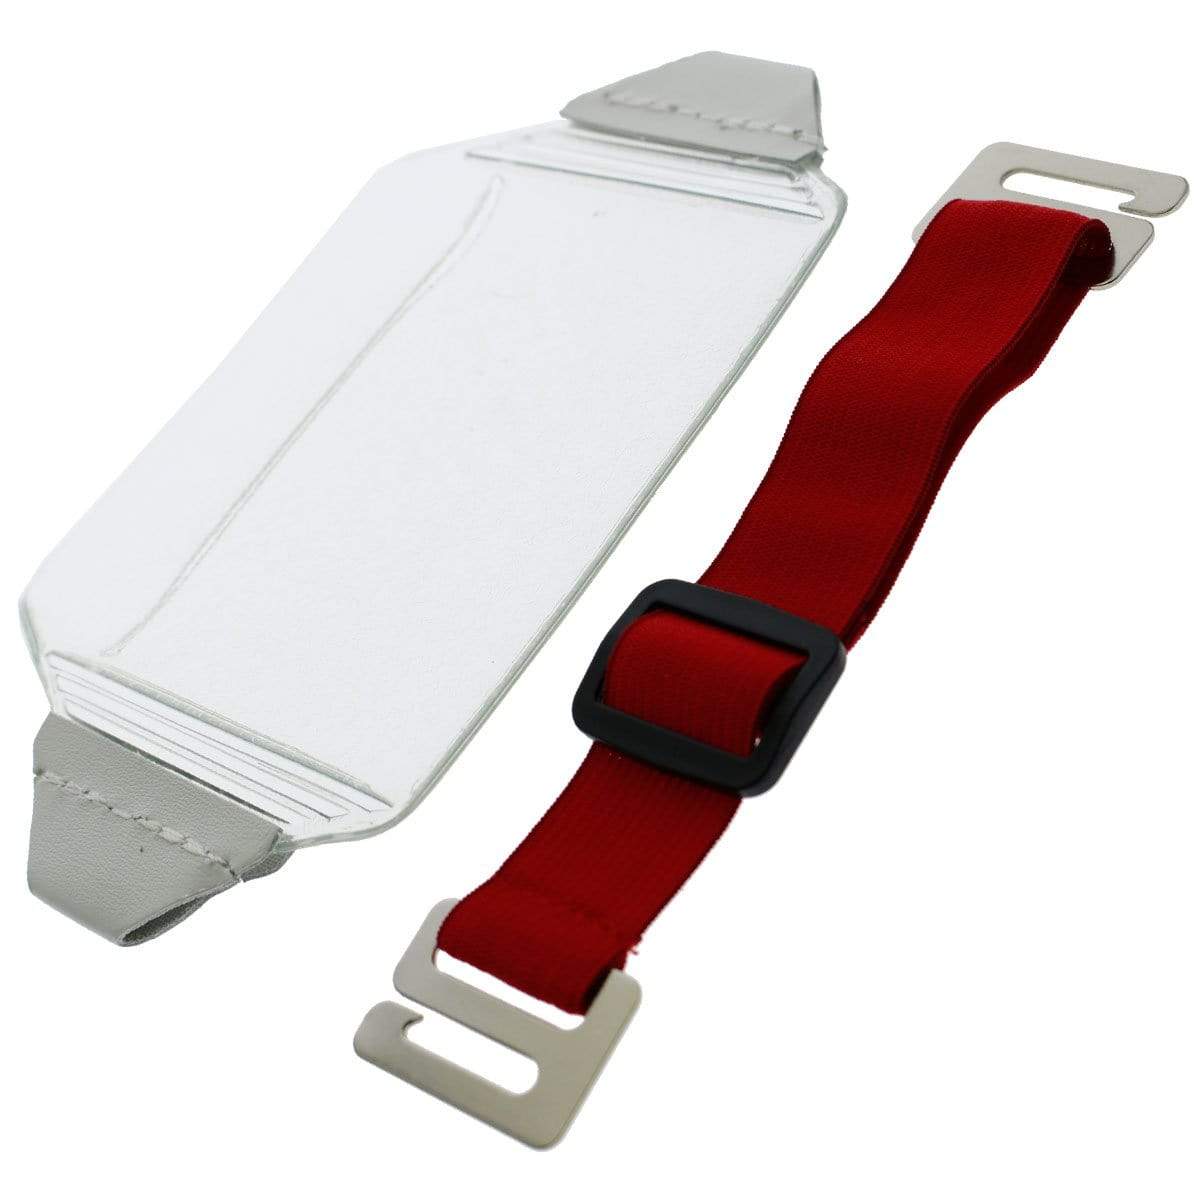 A clear over size vinyl horizontal arm band badge holder (P/N 1840-7100) with gray trim sits beside a red adjustable strap with metal buckles, reminiscent of an armband badge holder.